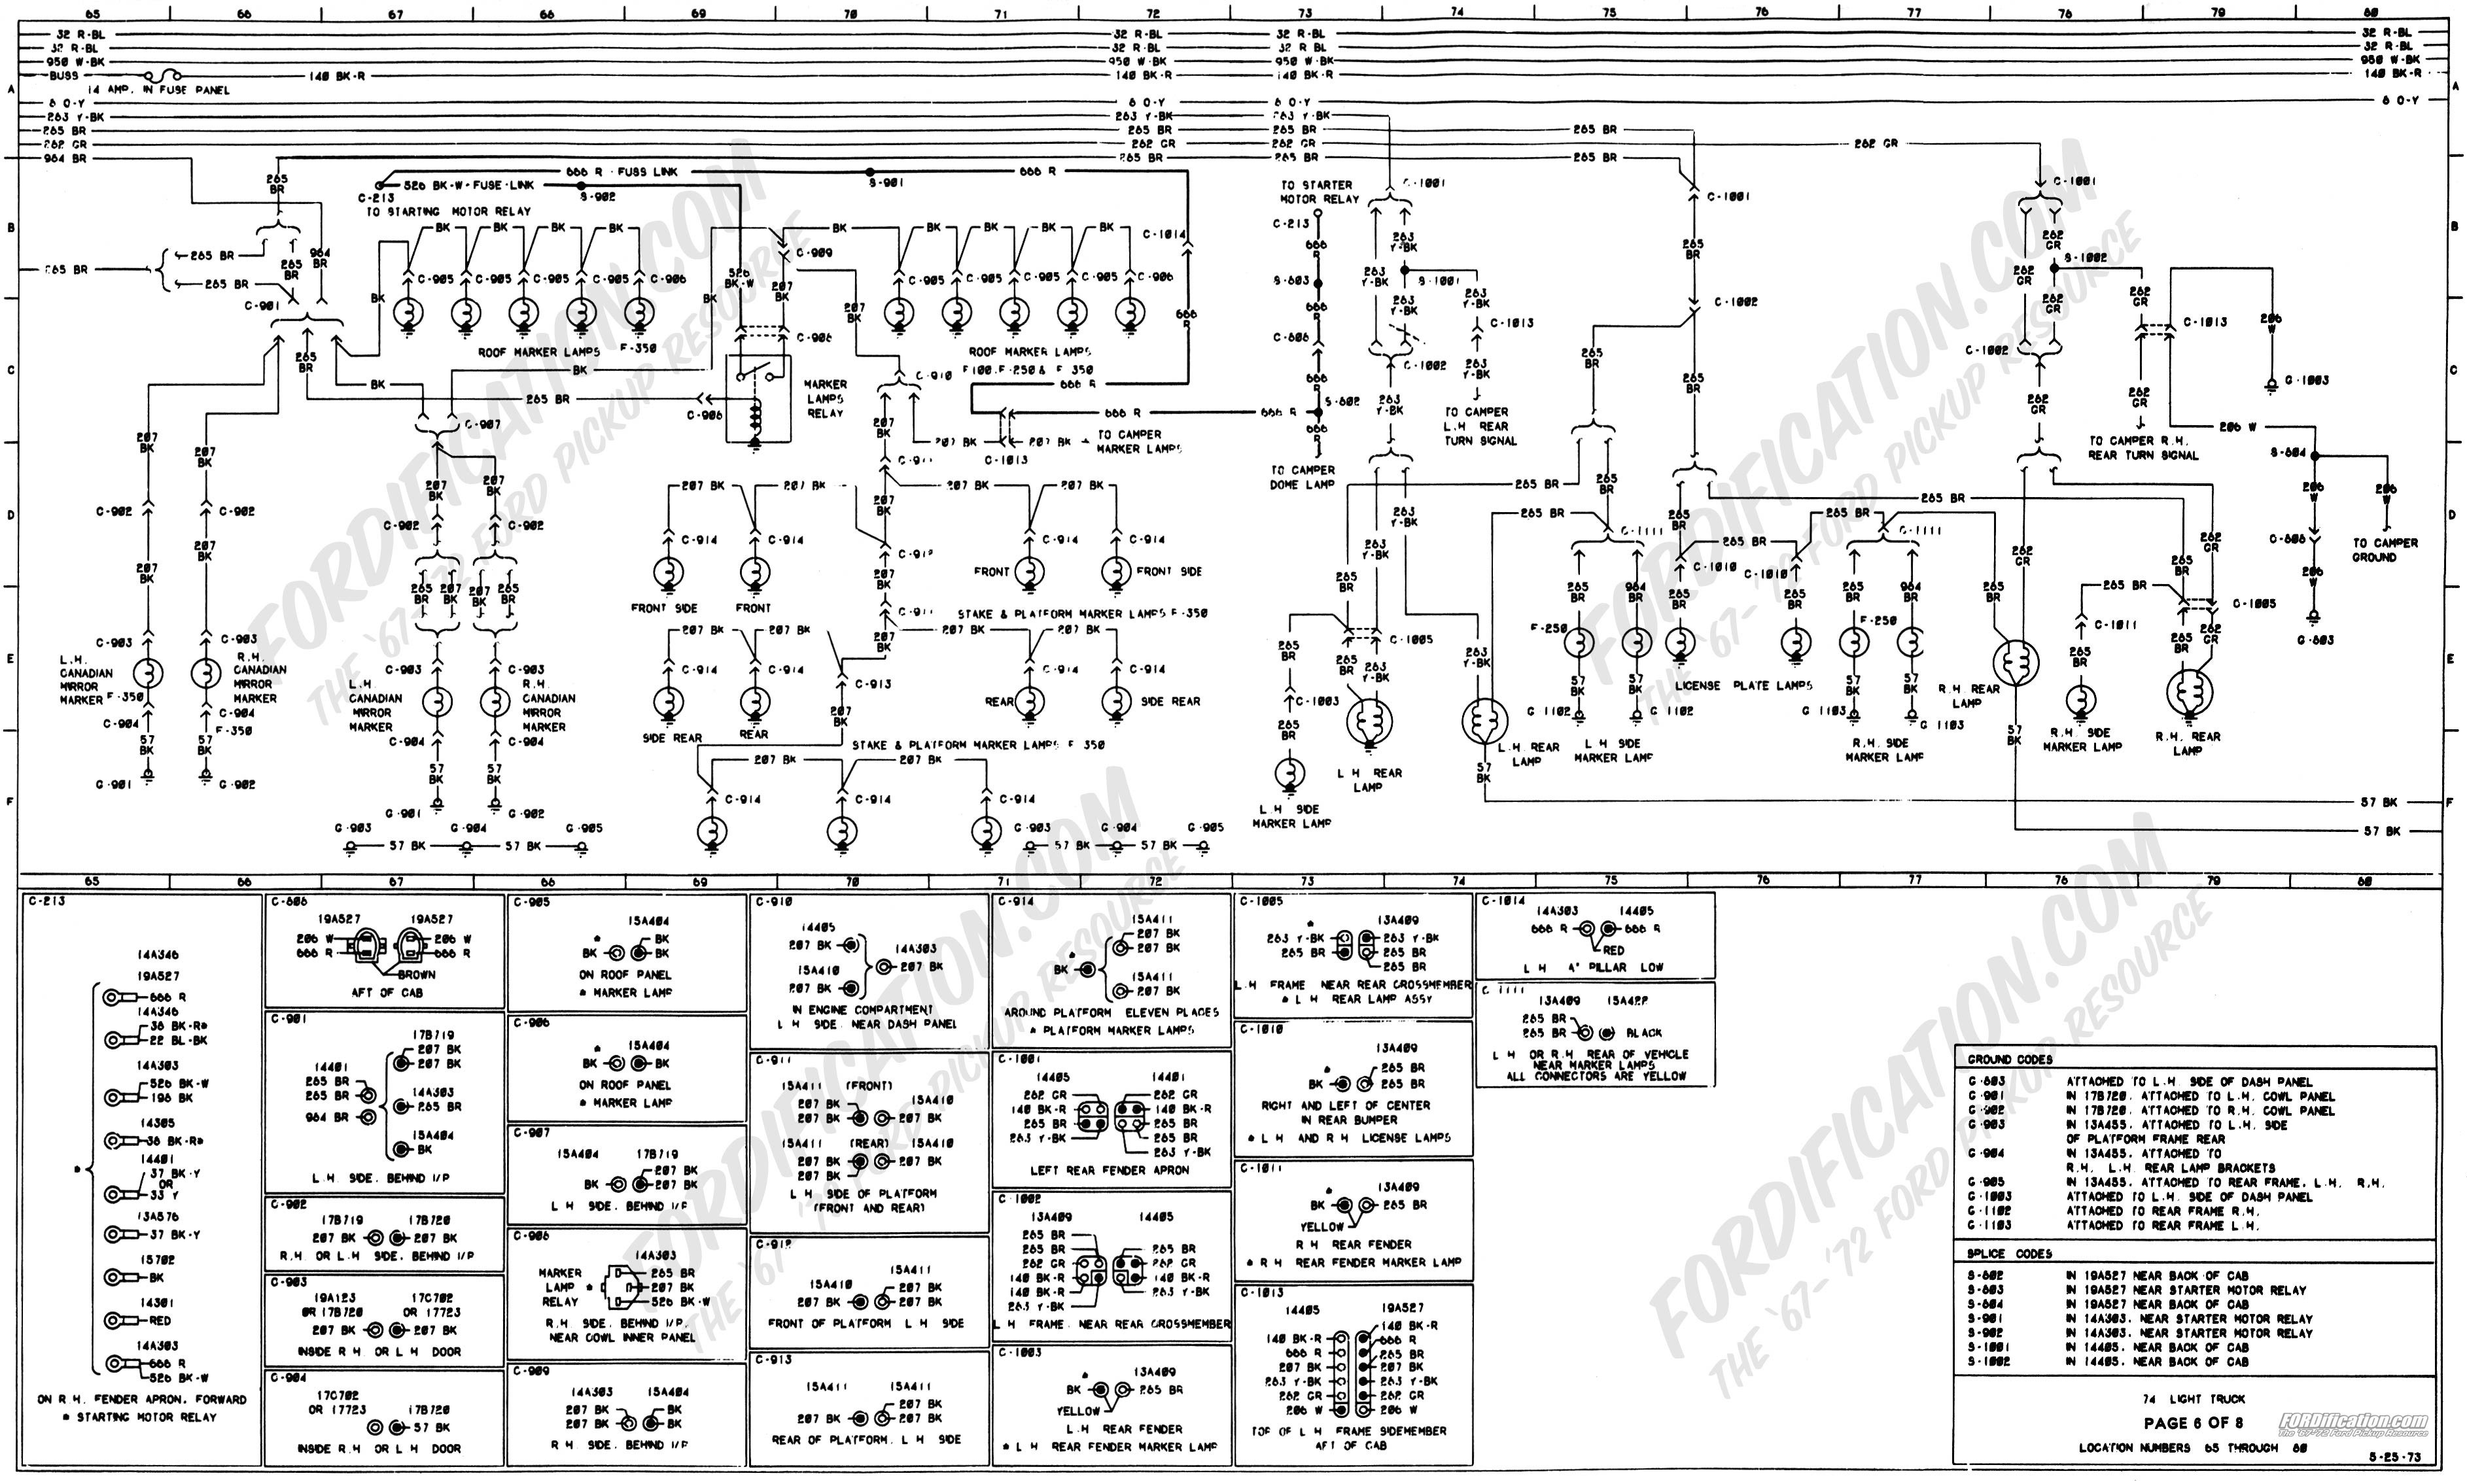 1973 Ford F100 Wiring Diagram from mainetreasurechest.com